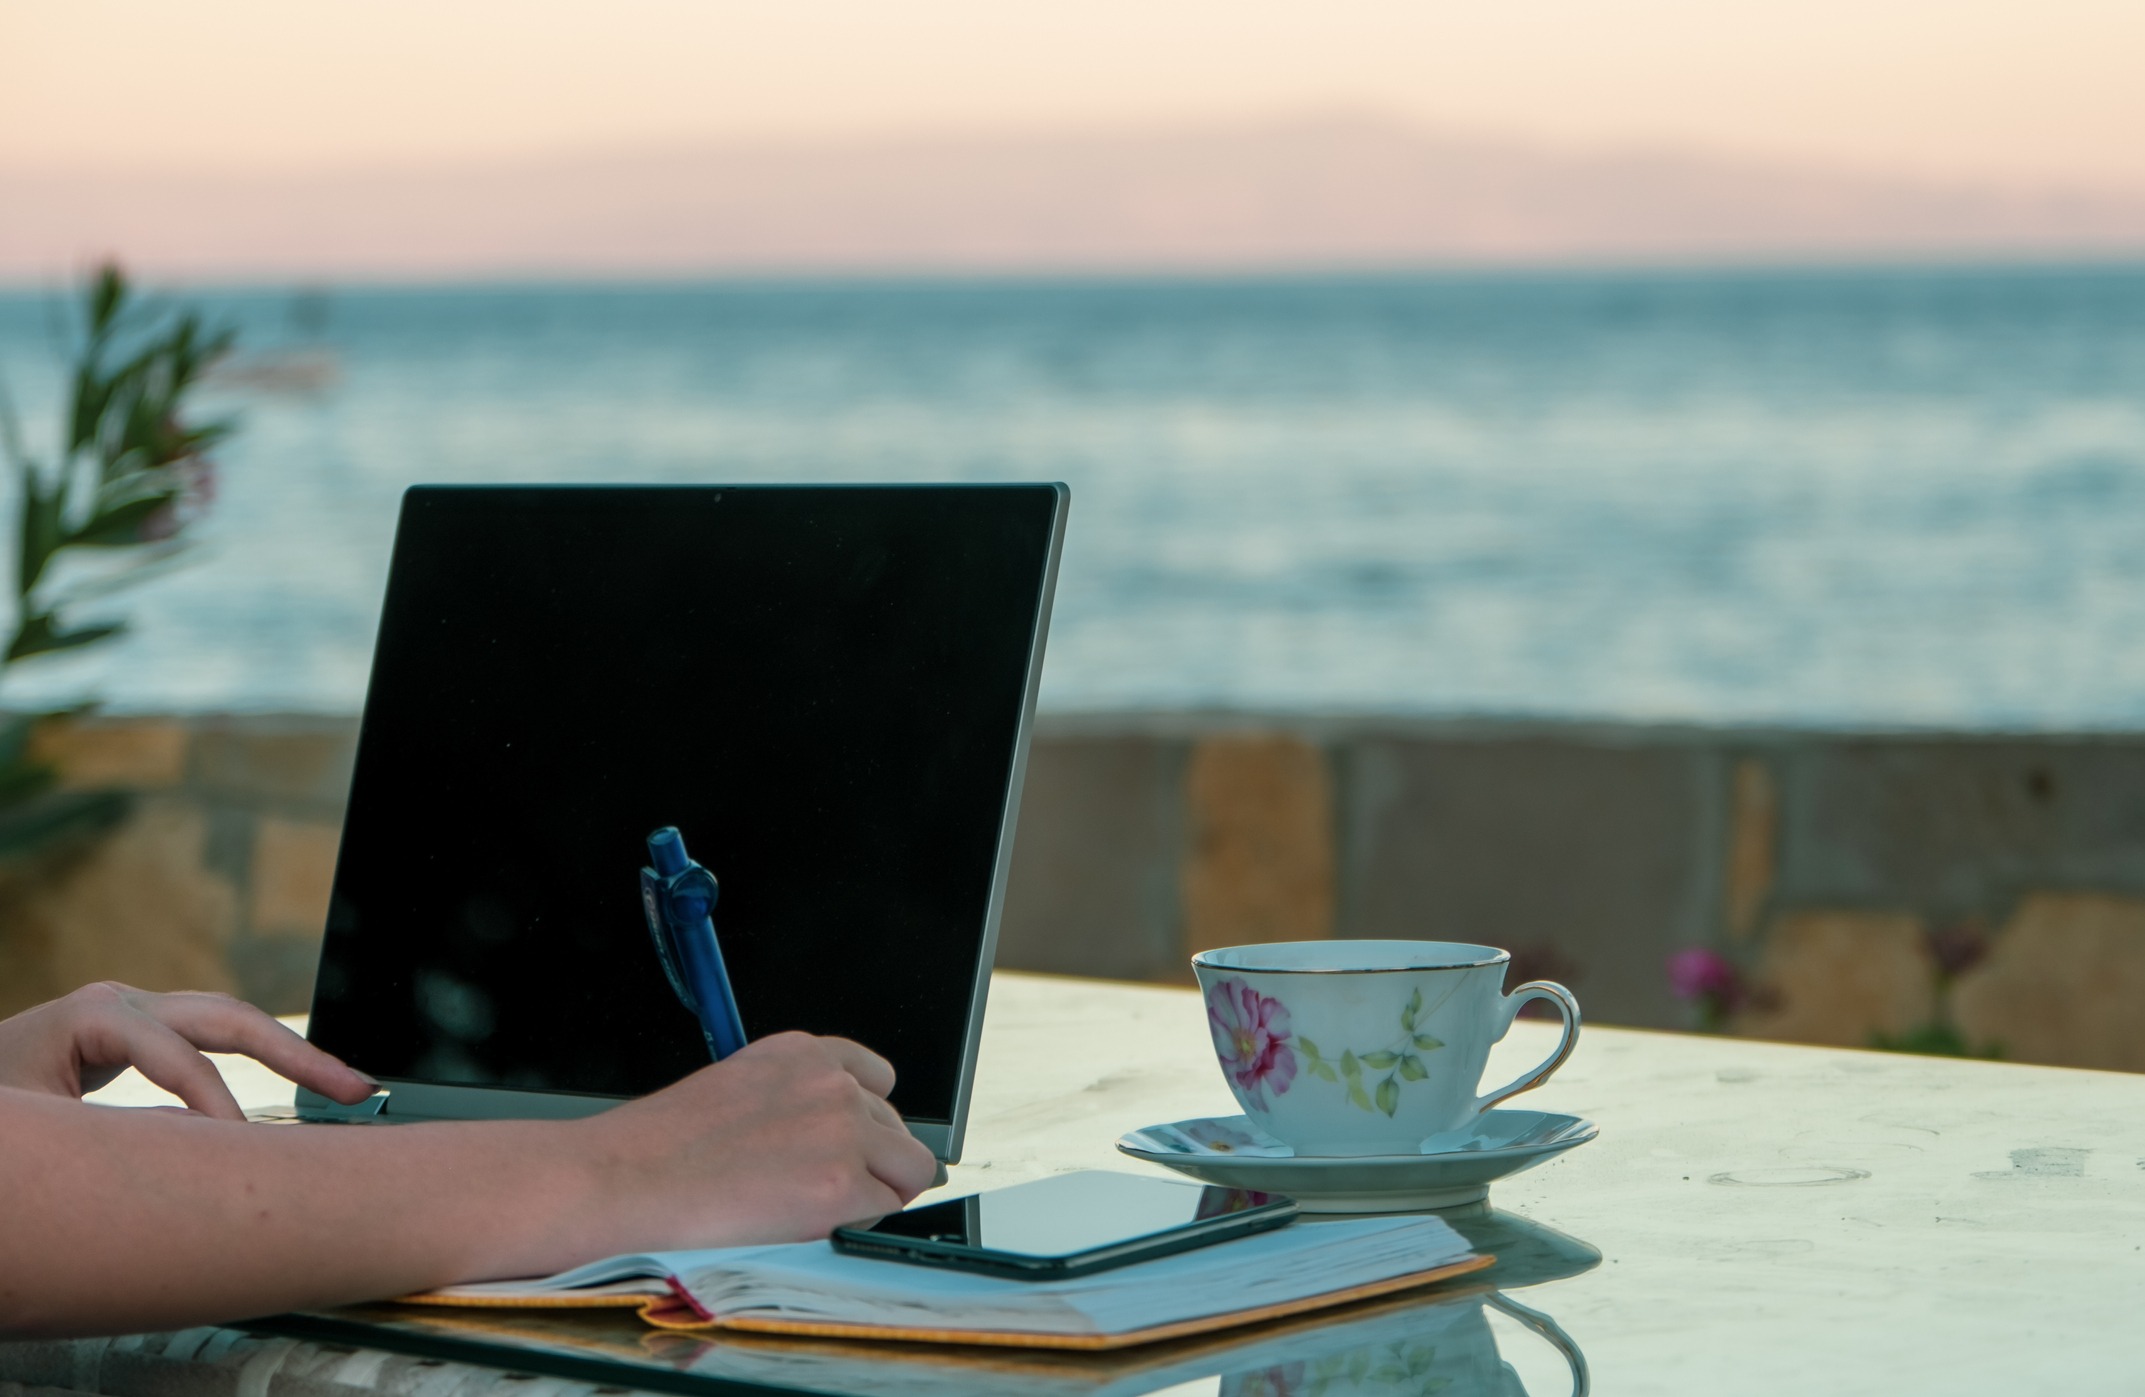 A person writing in a notebook with a laptop, phone and teacup on the table. A lake is in the background.